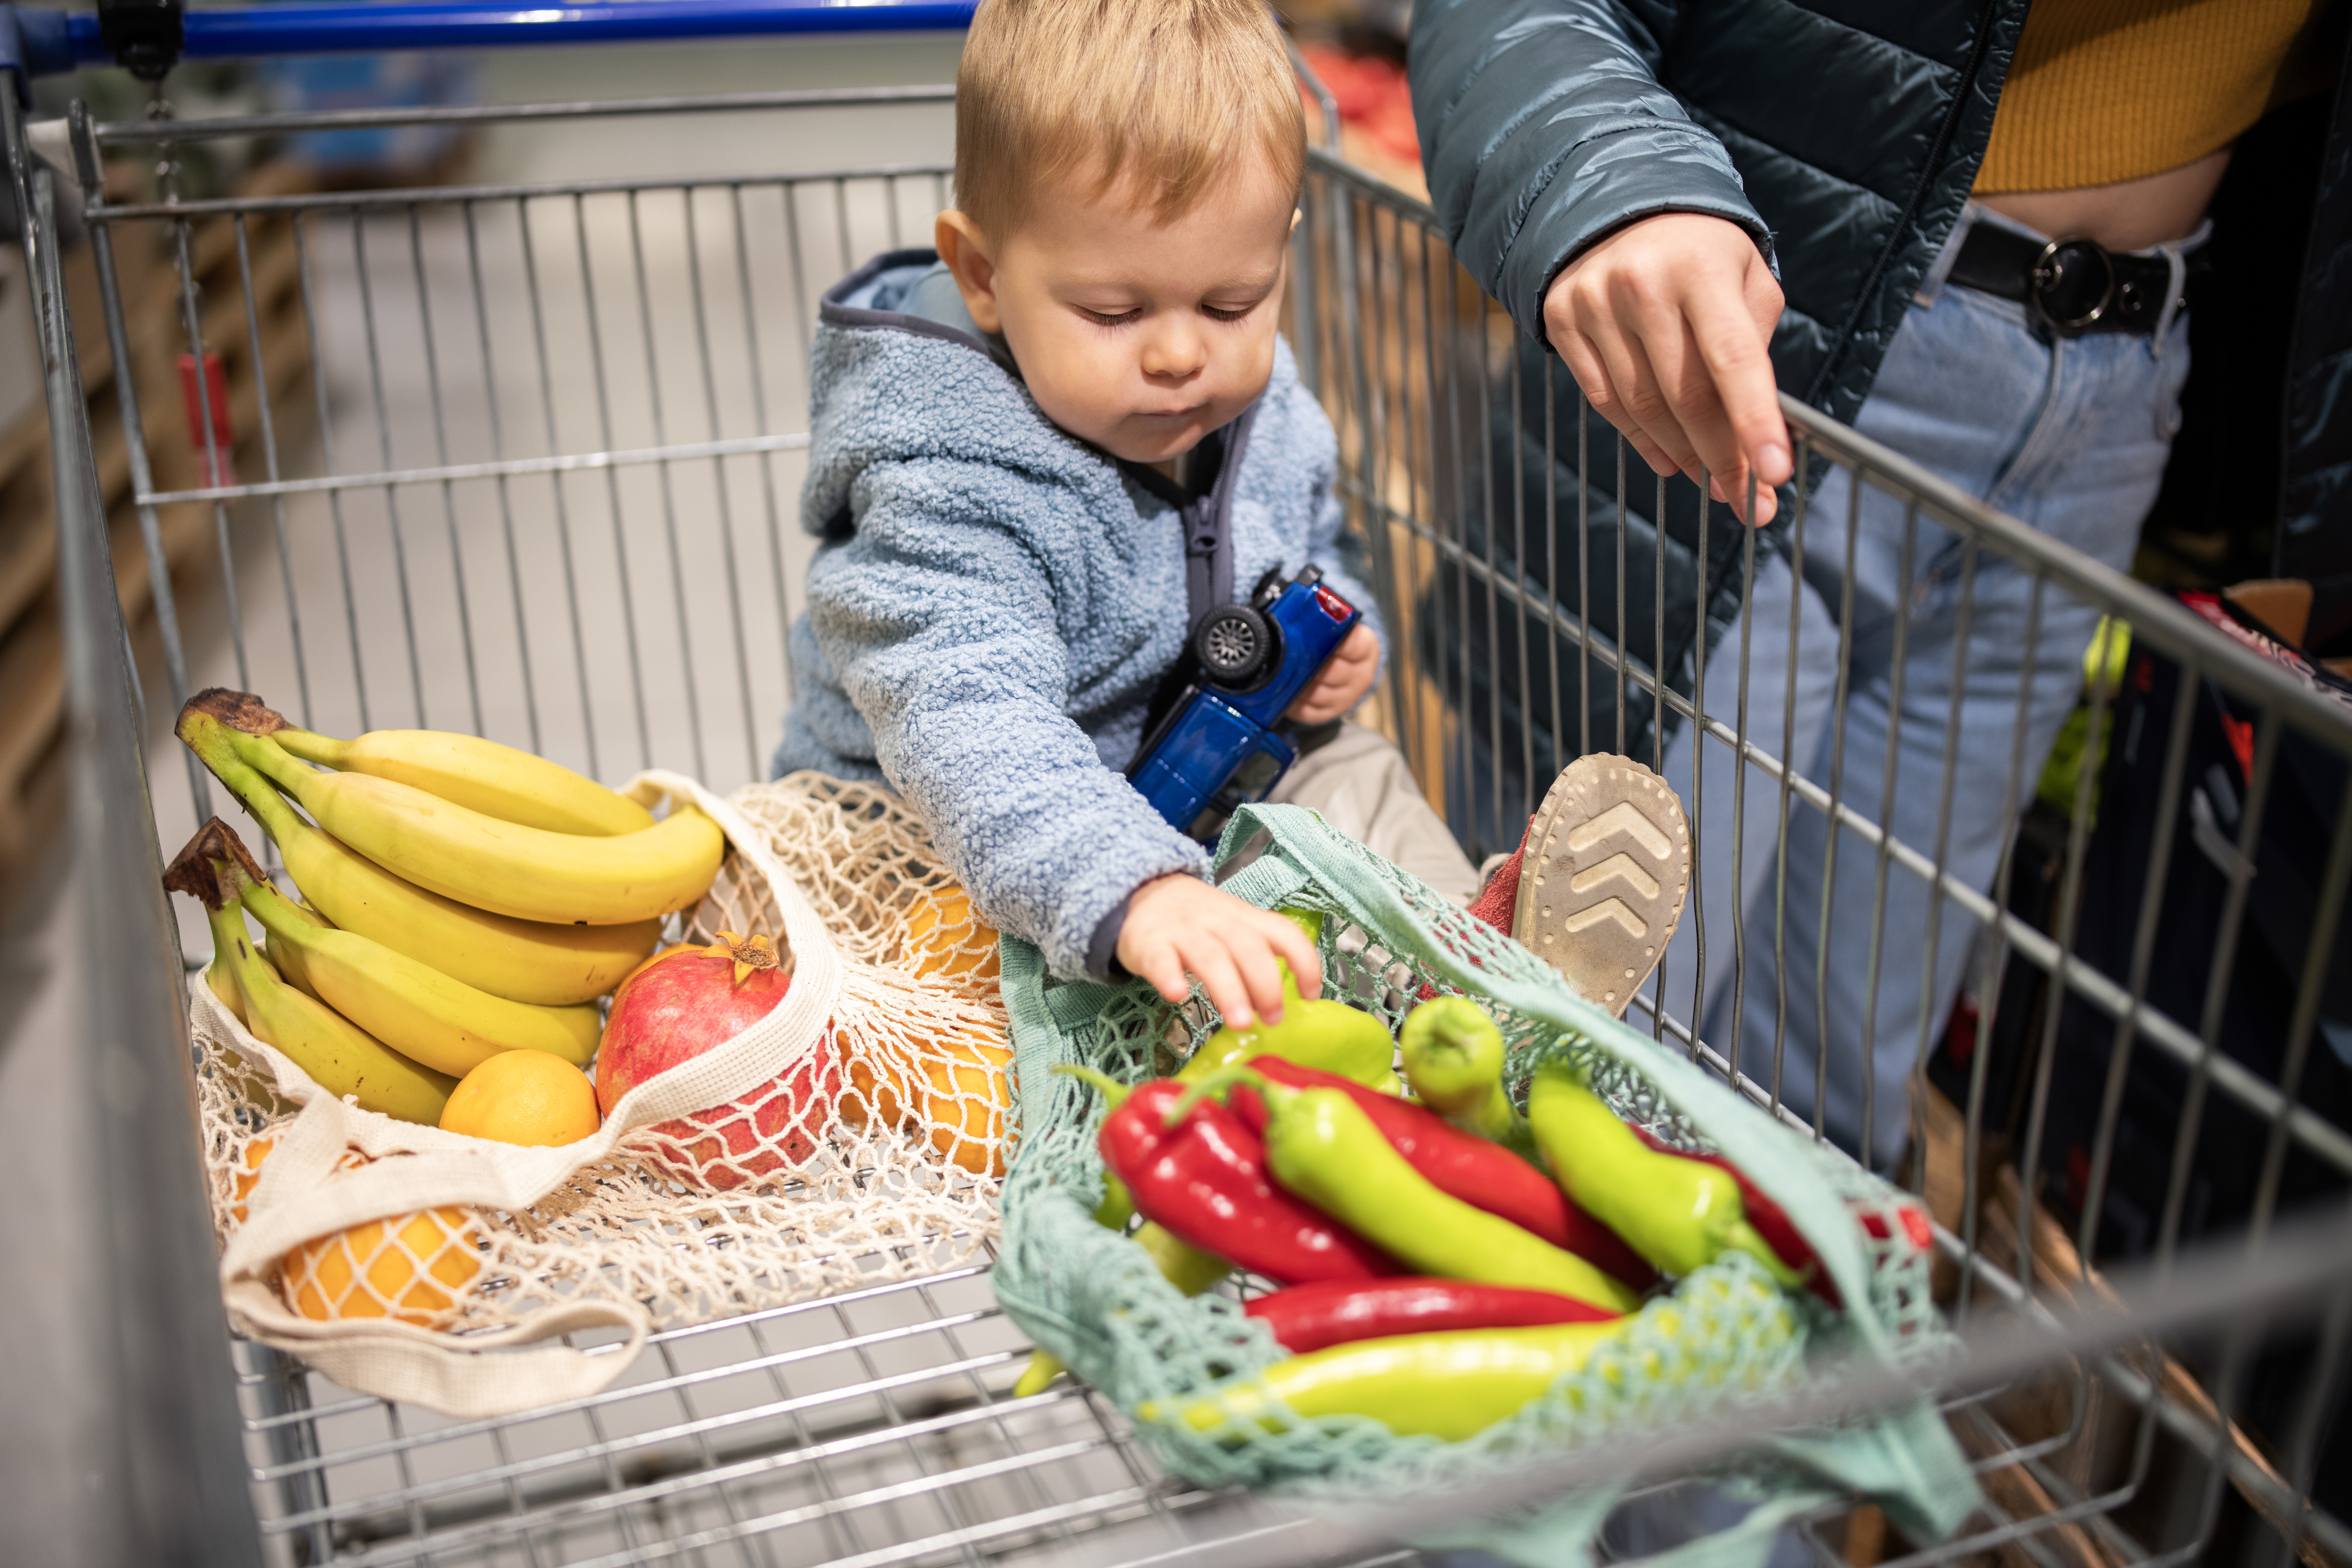 Toddler sitting in a shopping cart with fruits and vegetables, under the supervision of an adult